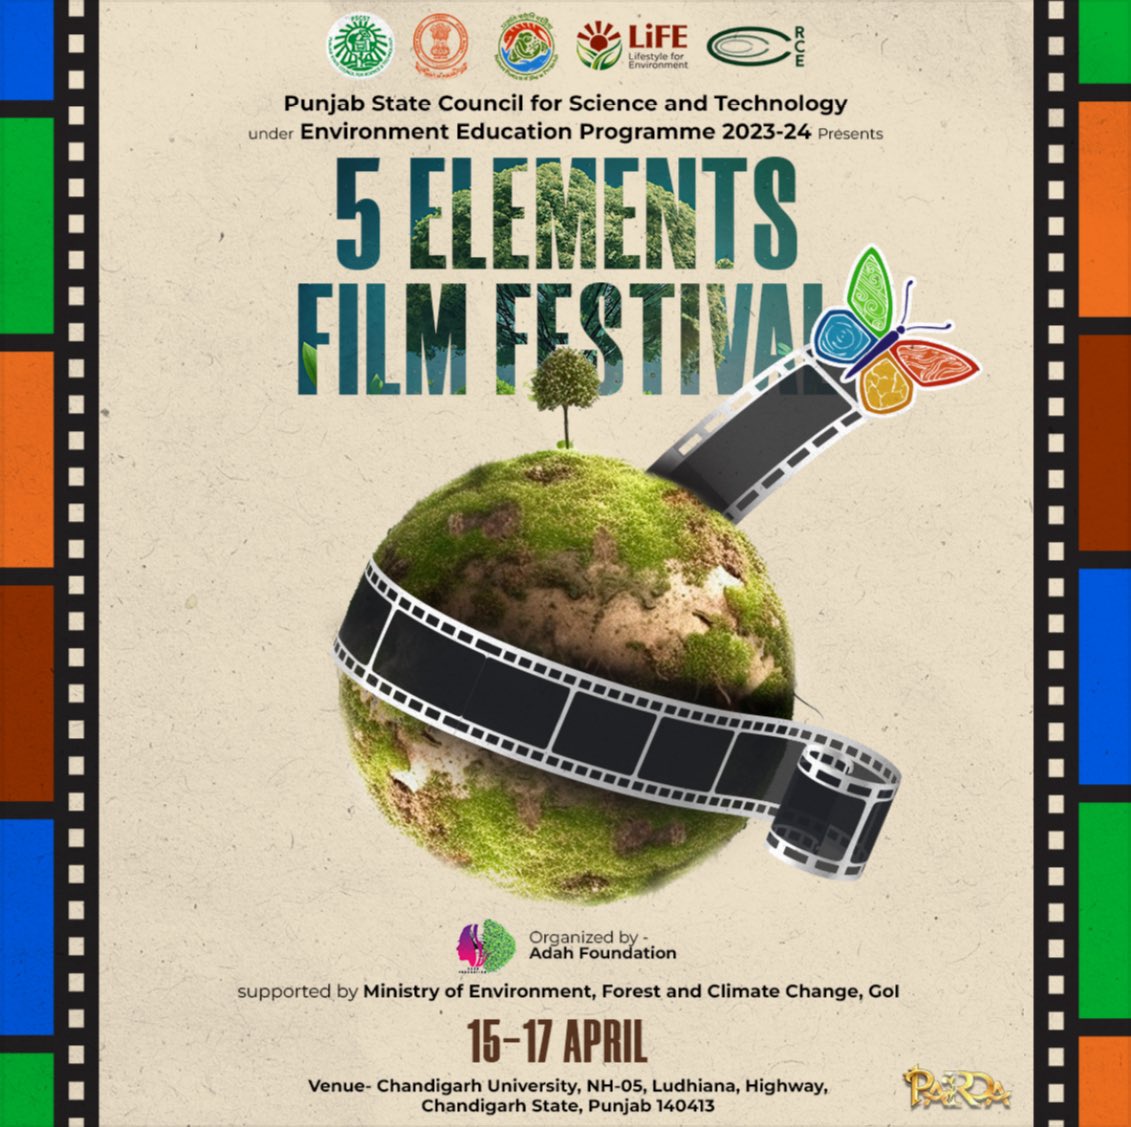 Join us for an unforgettable cinematic journey on April 15th-17th @CU_Chd Presented by @PSCST_GoP Organised by @AdahFoundation, PARDA Supported by @moefcc Join us for thought-provoking films, lively discussions and hands-on workshops! #shukarstudios #PARDA